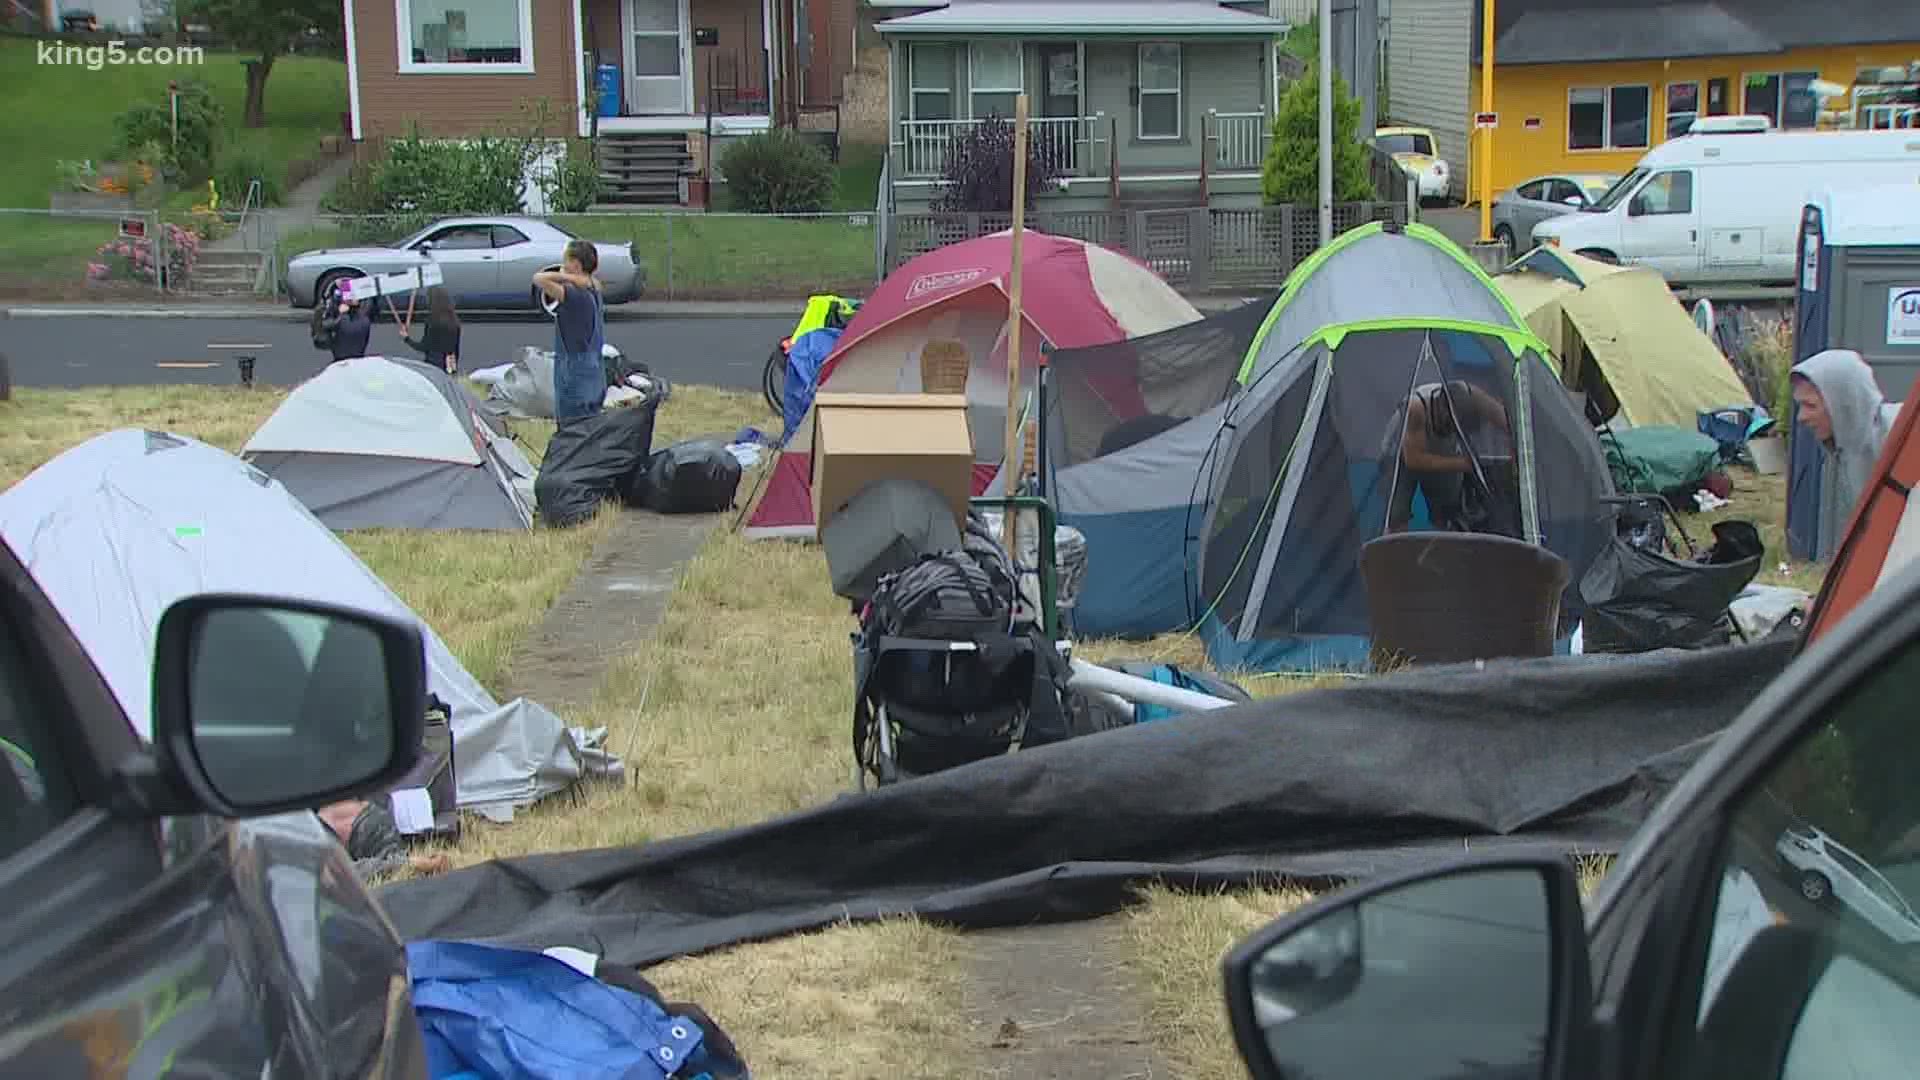 Advocates say the overwhelming majority of the 110 homeless residents simply dispersed into the community. City officials say they're exploring housing options.